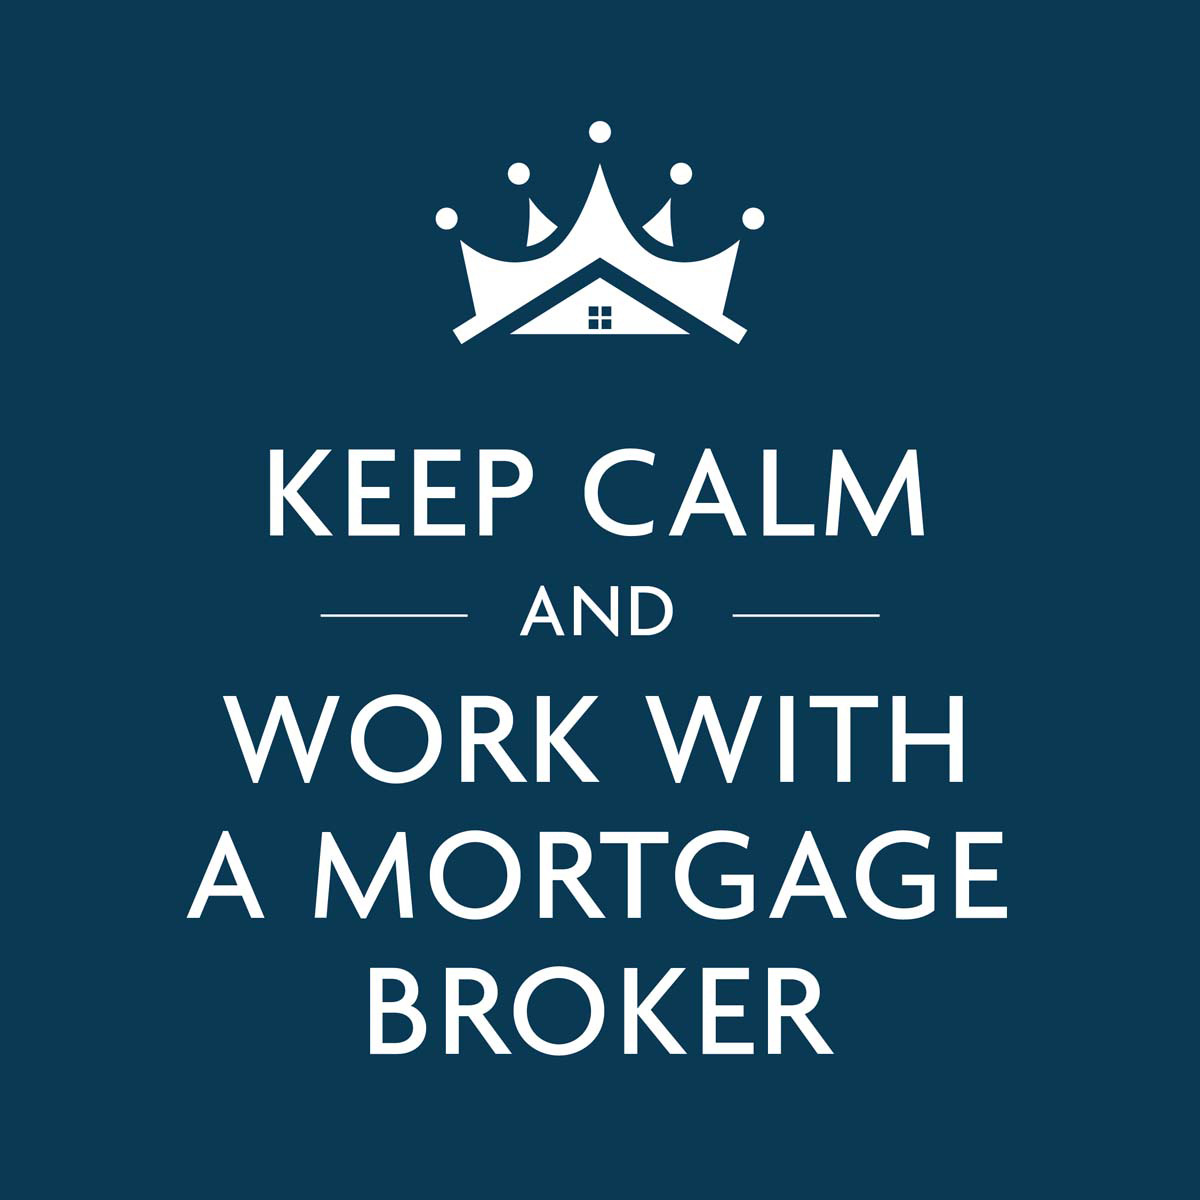 Going through the mortgage process doesn’t have to be stressful. We specialize in mortgages. It’s all we do. Call or DM me today. Let us show you how fast and easy it can be. 

#newhouse #summertime #moving #phillyrealestate #sandiegorealestate #newjerseyrealestate